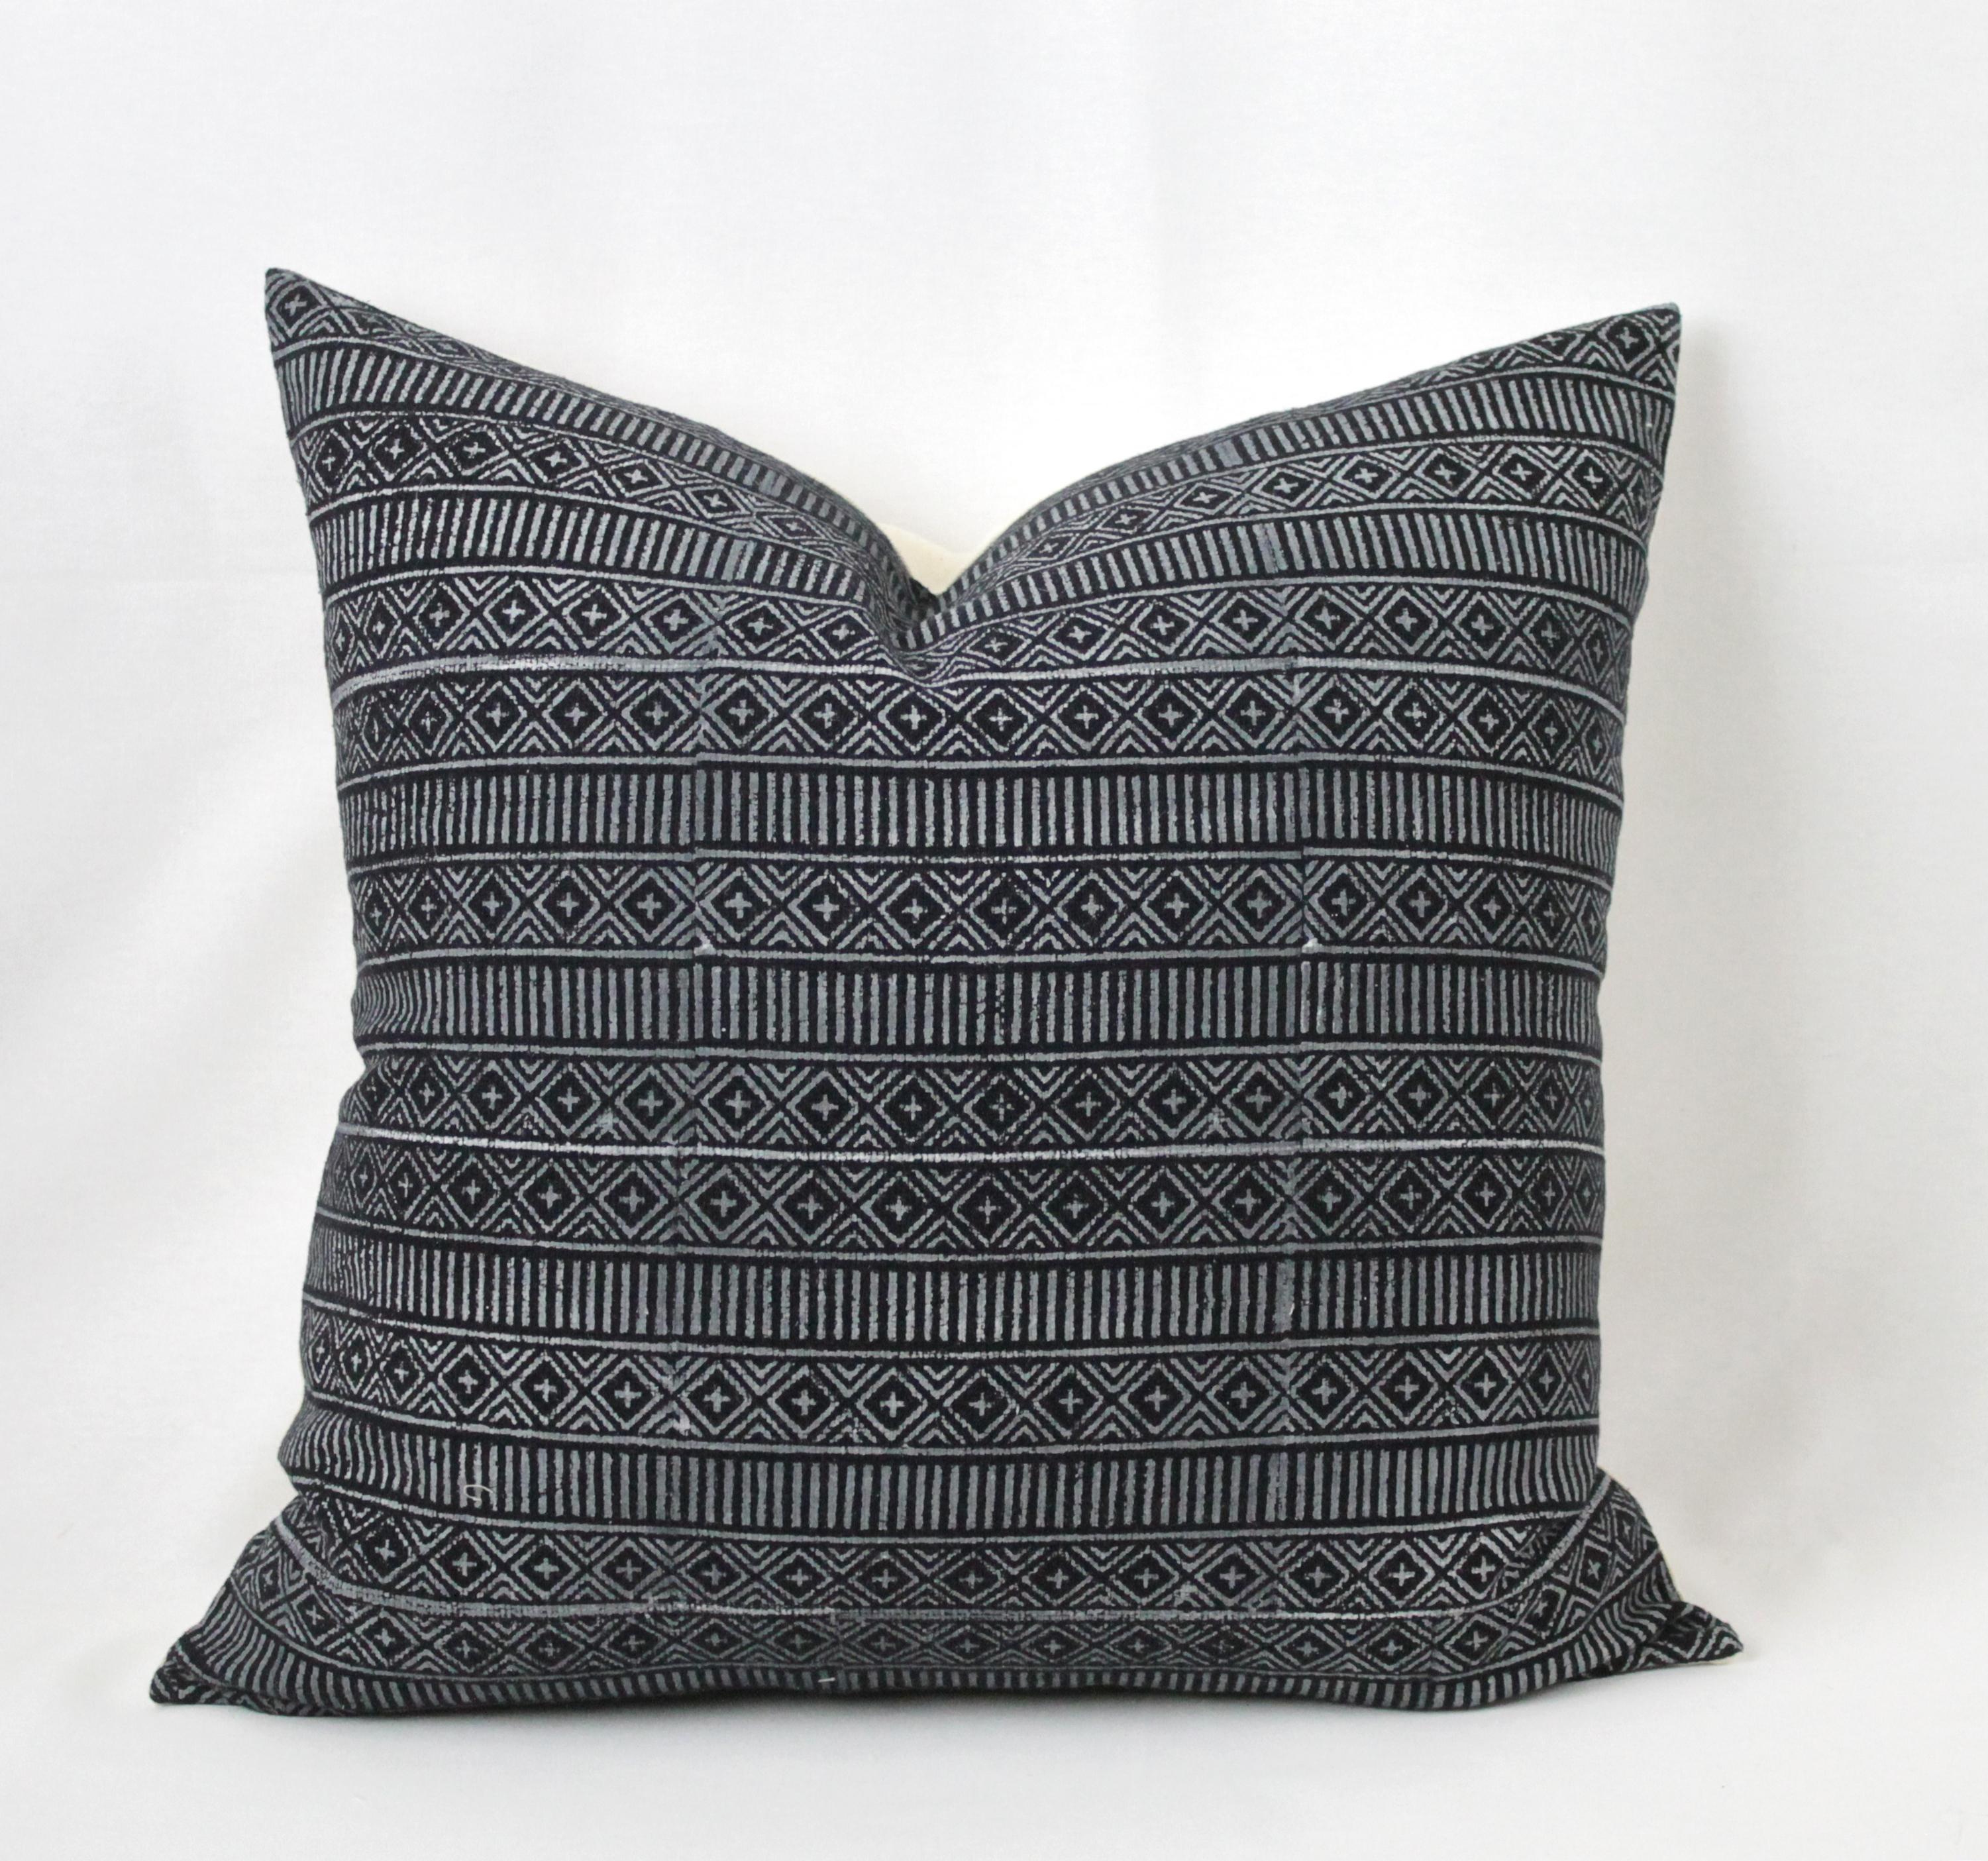 Black and Off-White Geometric Style Pillows In Good Condition For Sale In Brea, CA